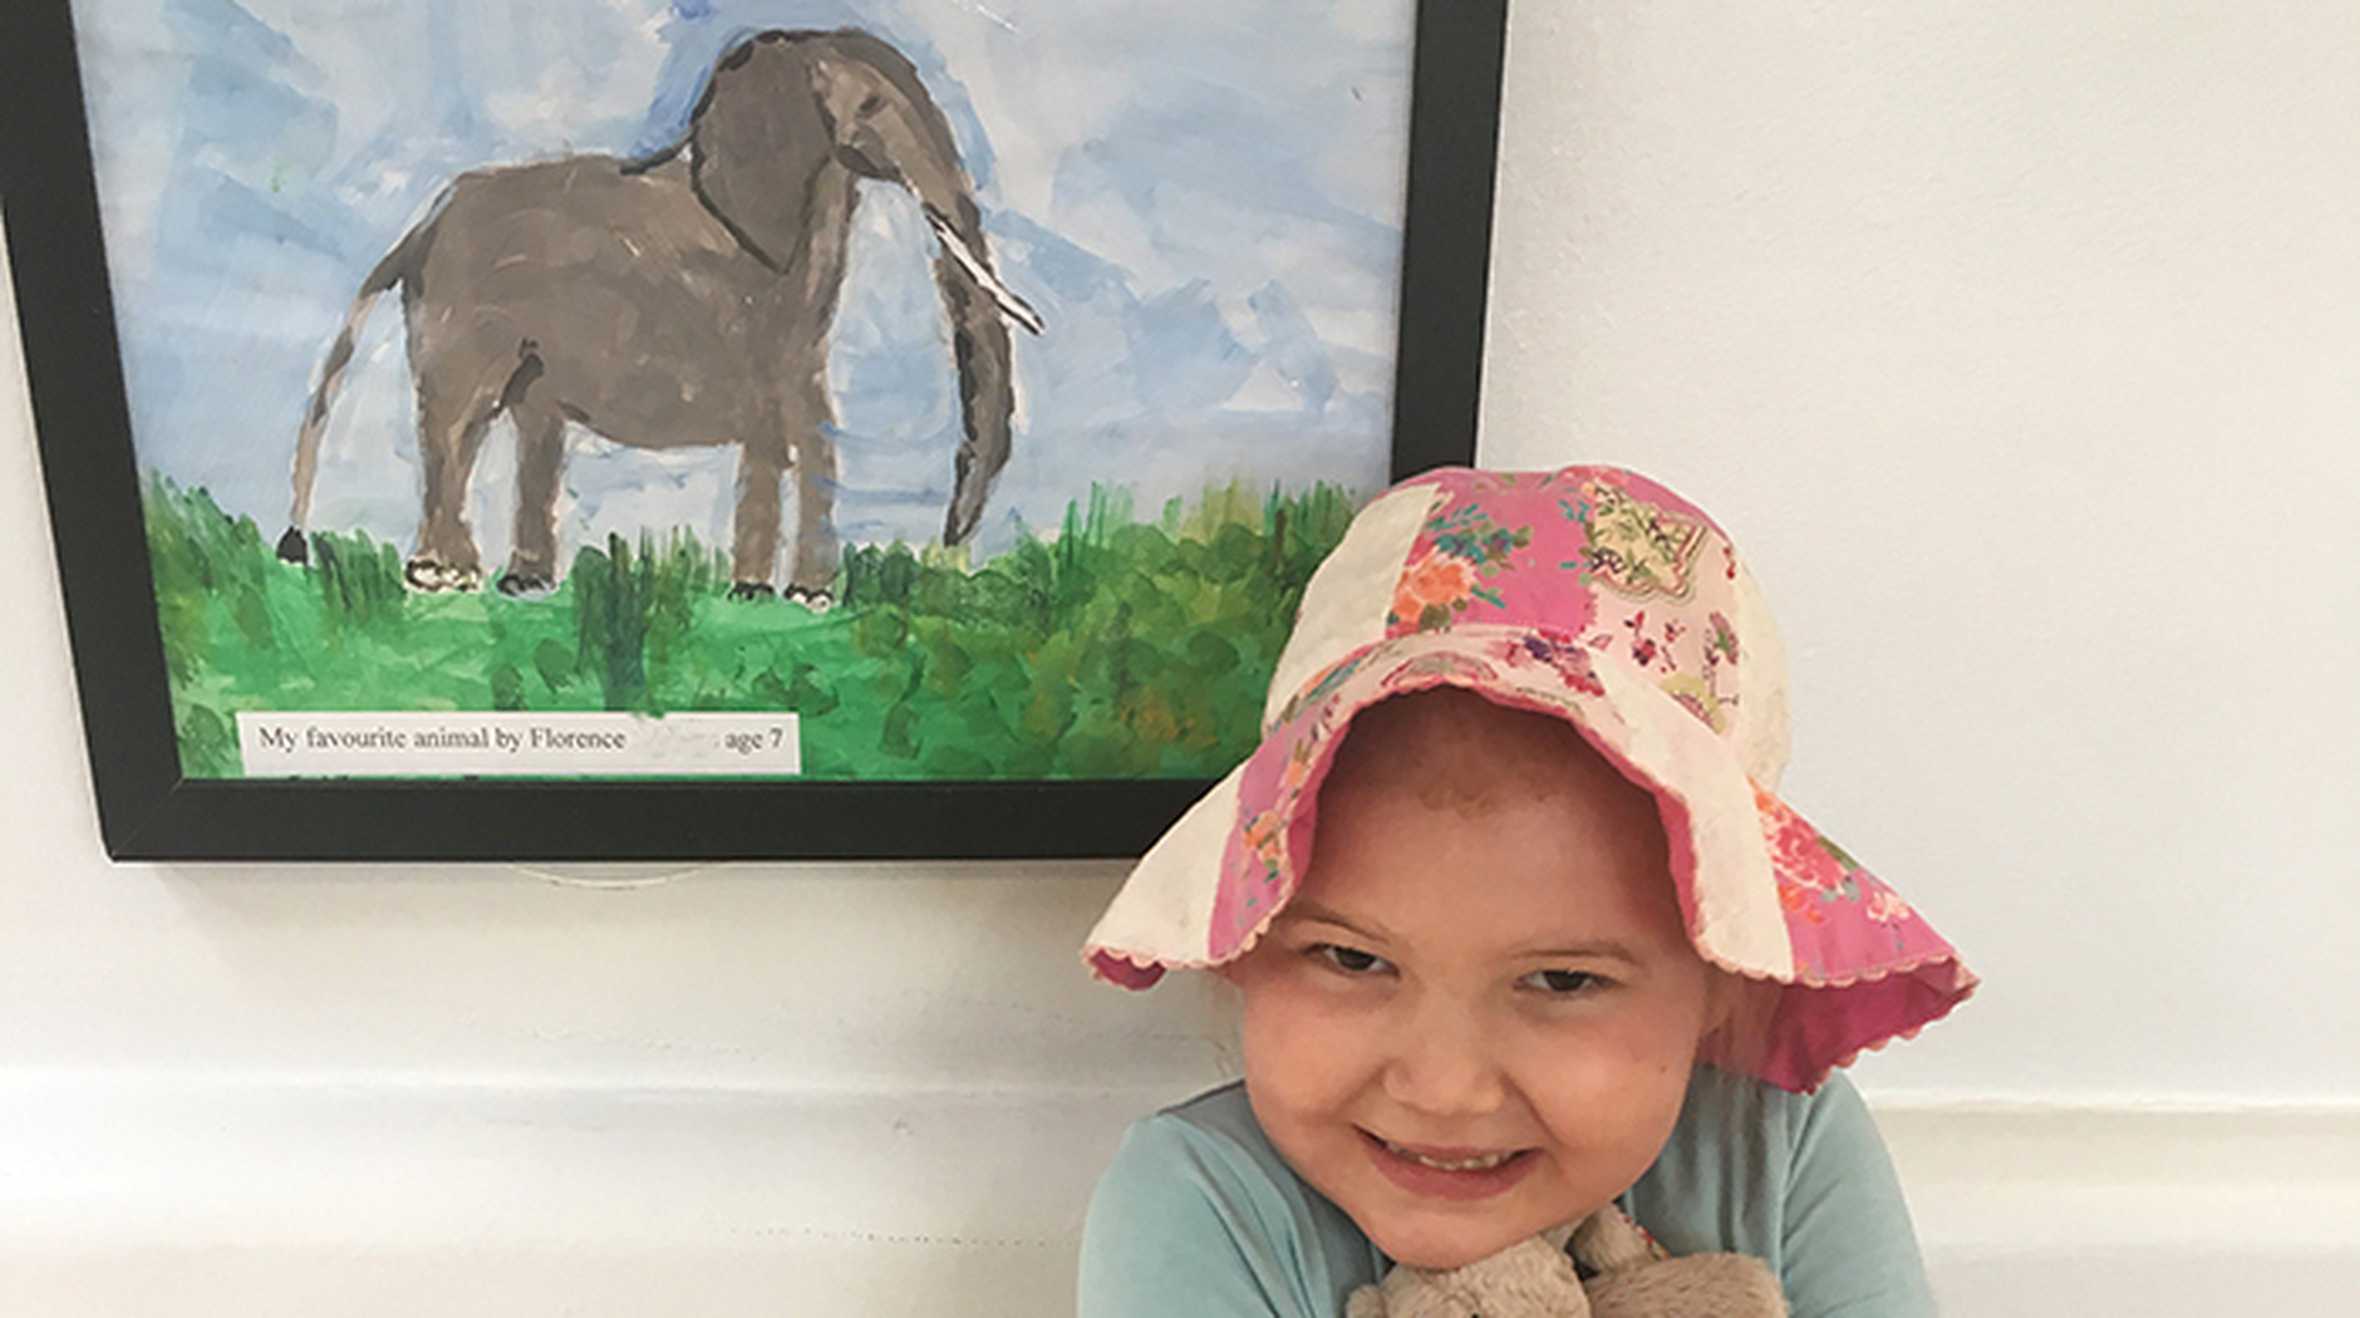 Florence with her elephant paining